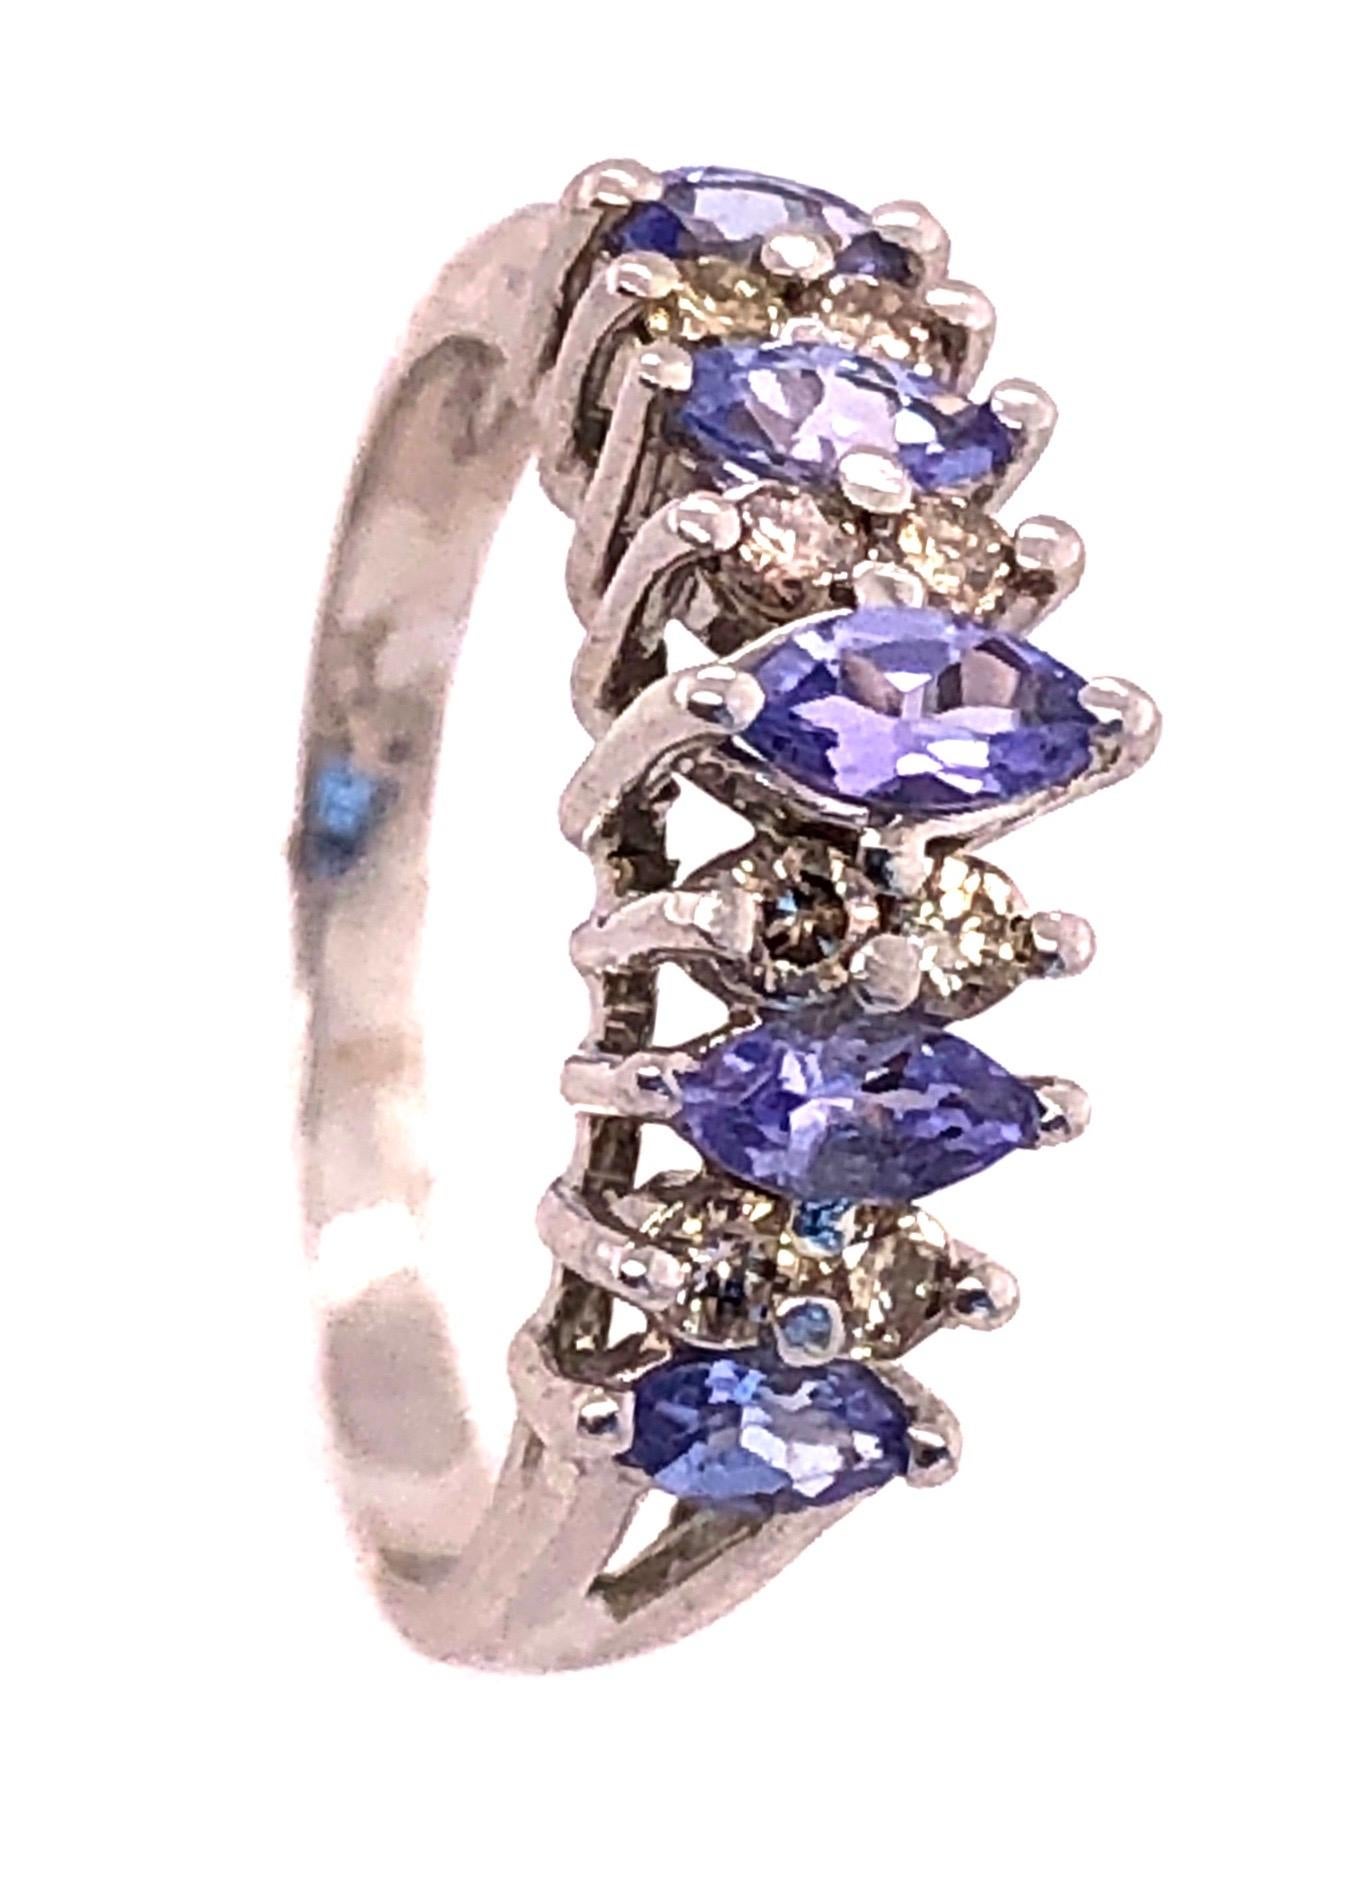 14 Kt White Gold Fashion Diamond And Amethyst Ring 1.50 Total Diamond Weight.
Size 8 
4.00 grams total weight.